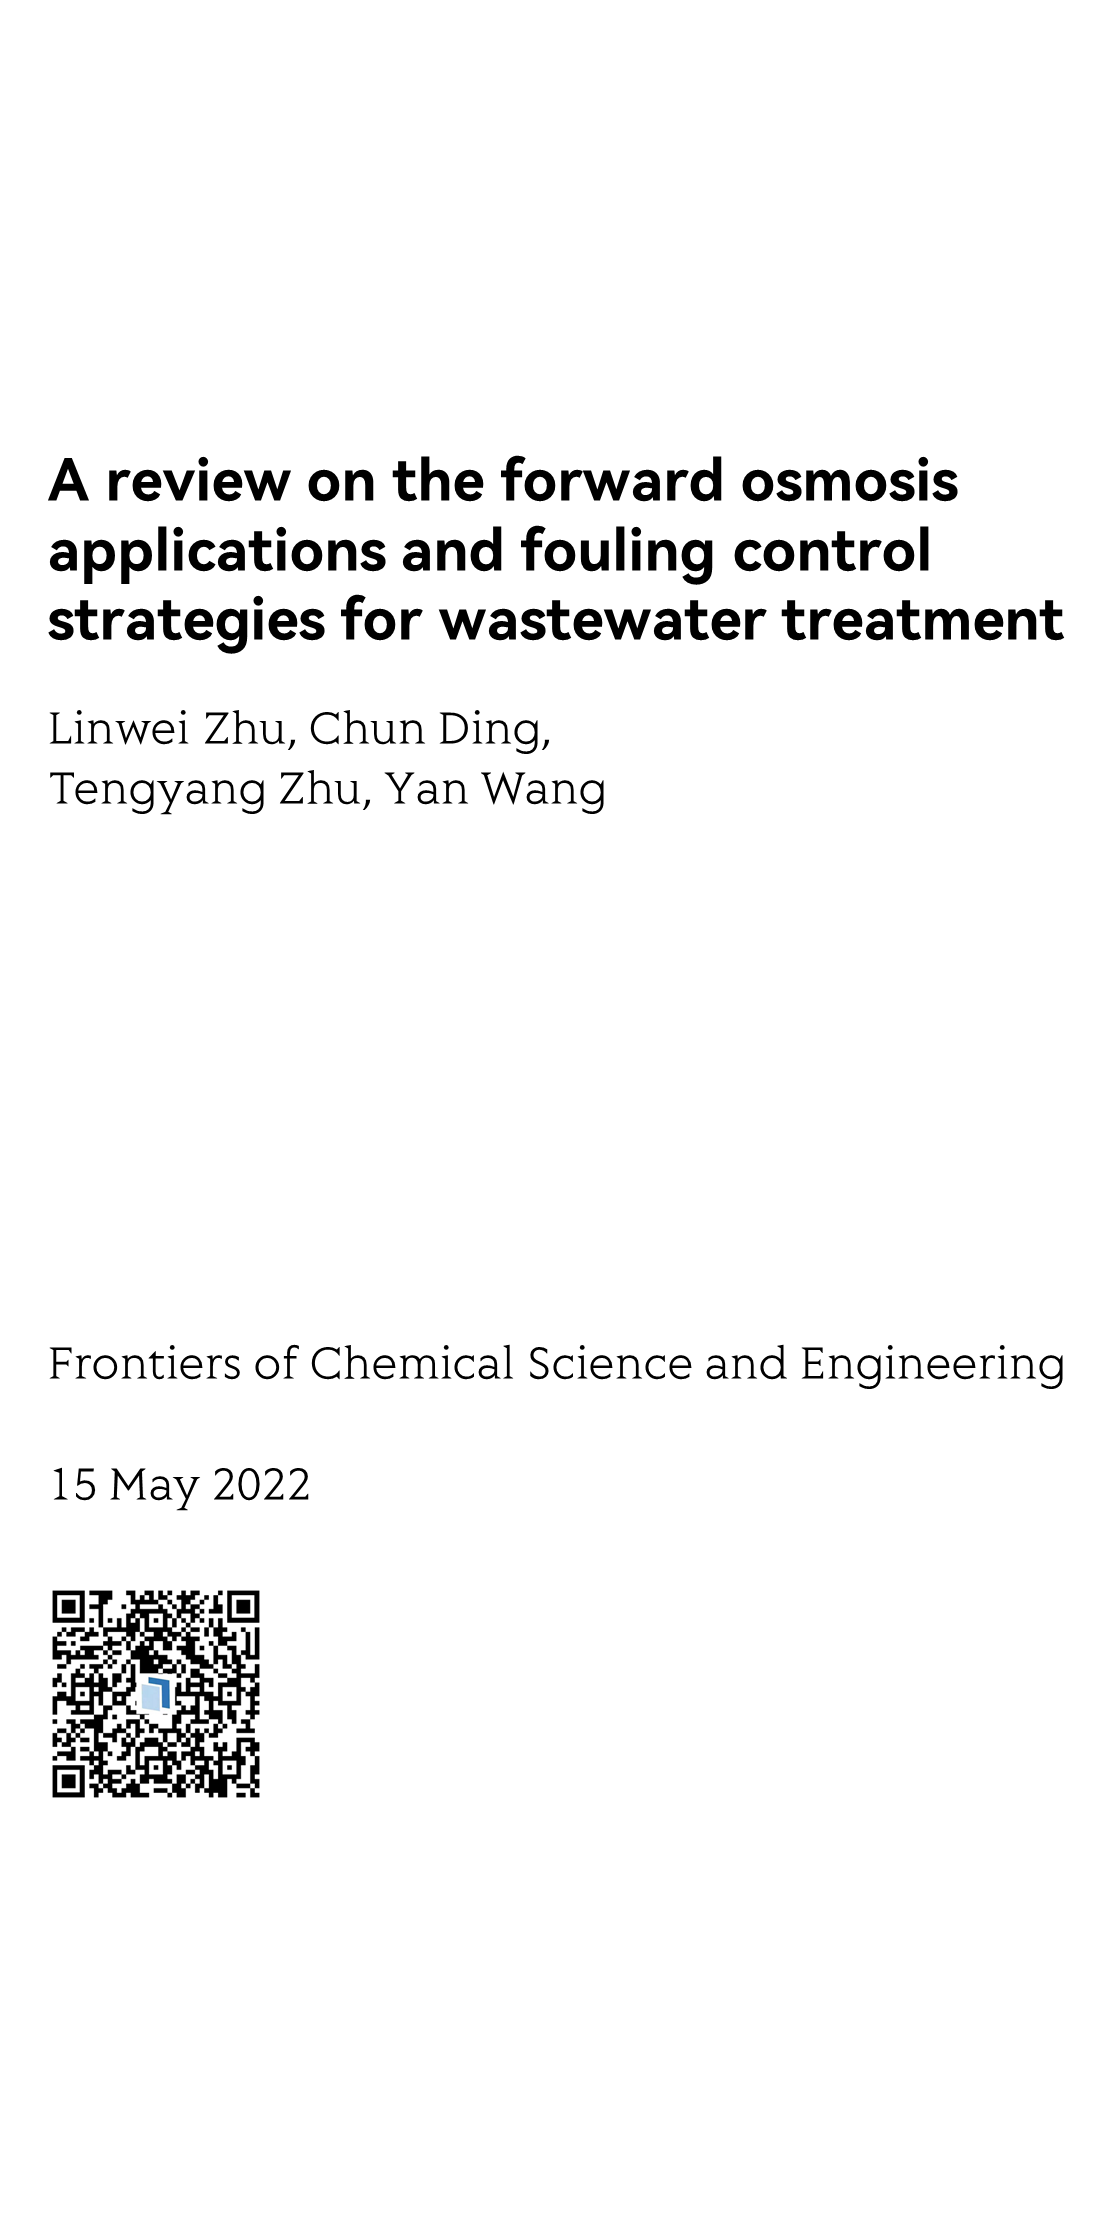 A review on the forward osmosis applications and fouling control strategies for wastewater treatment_1